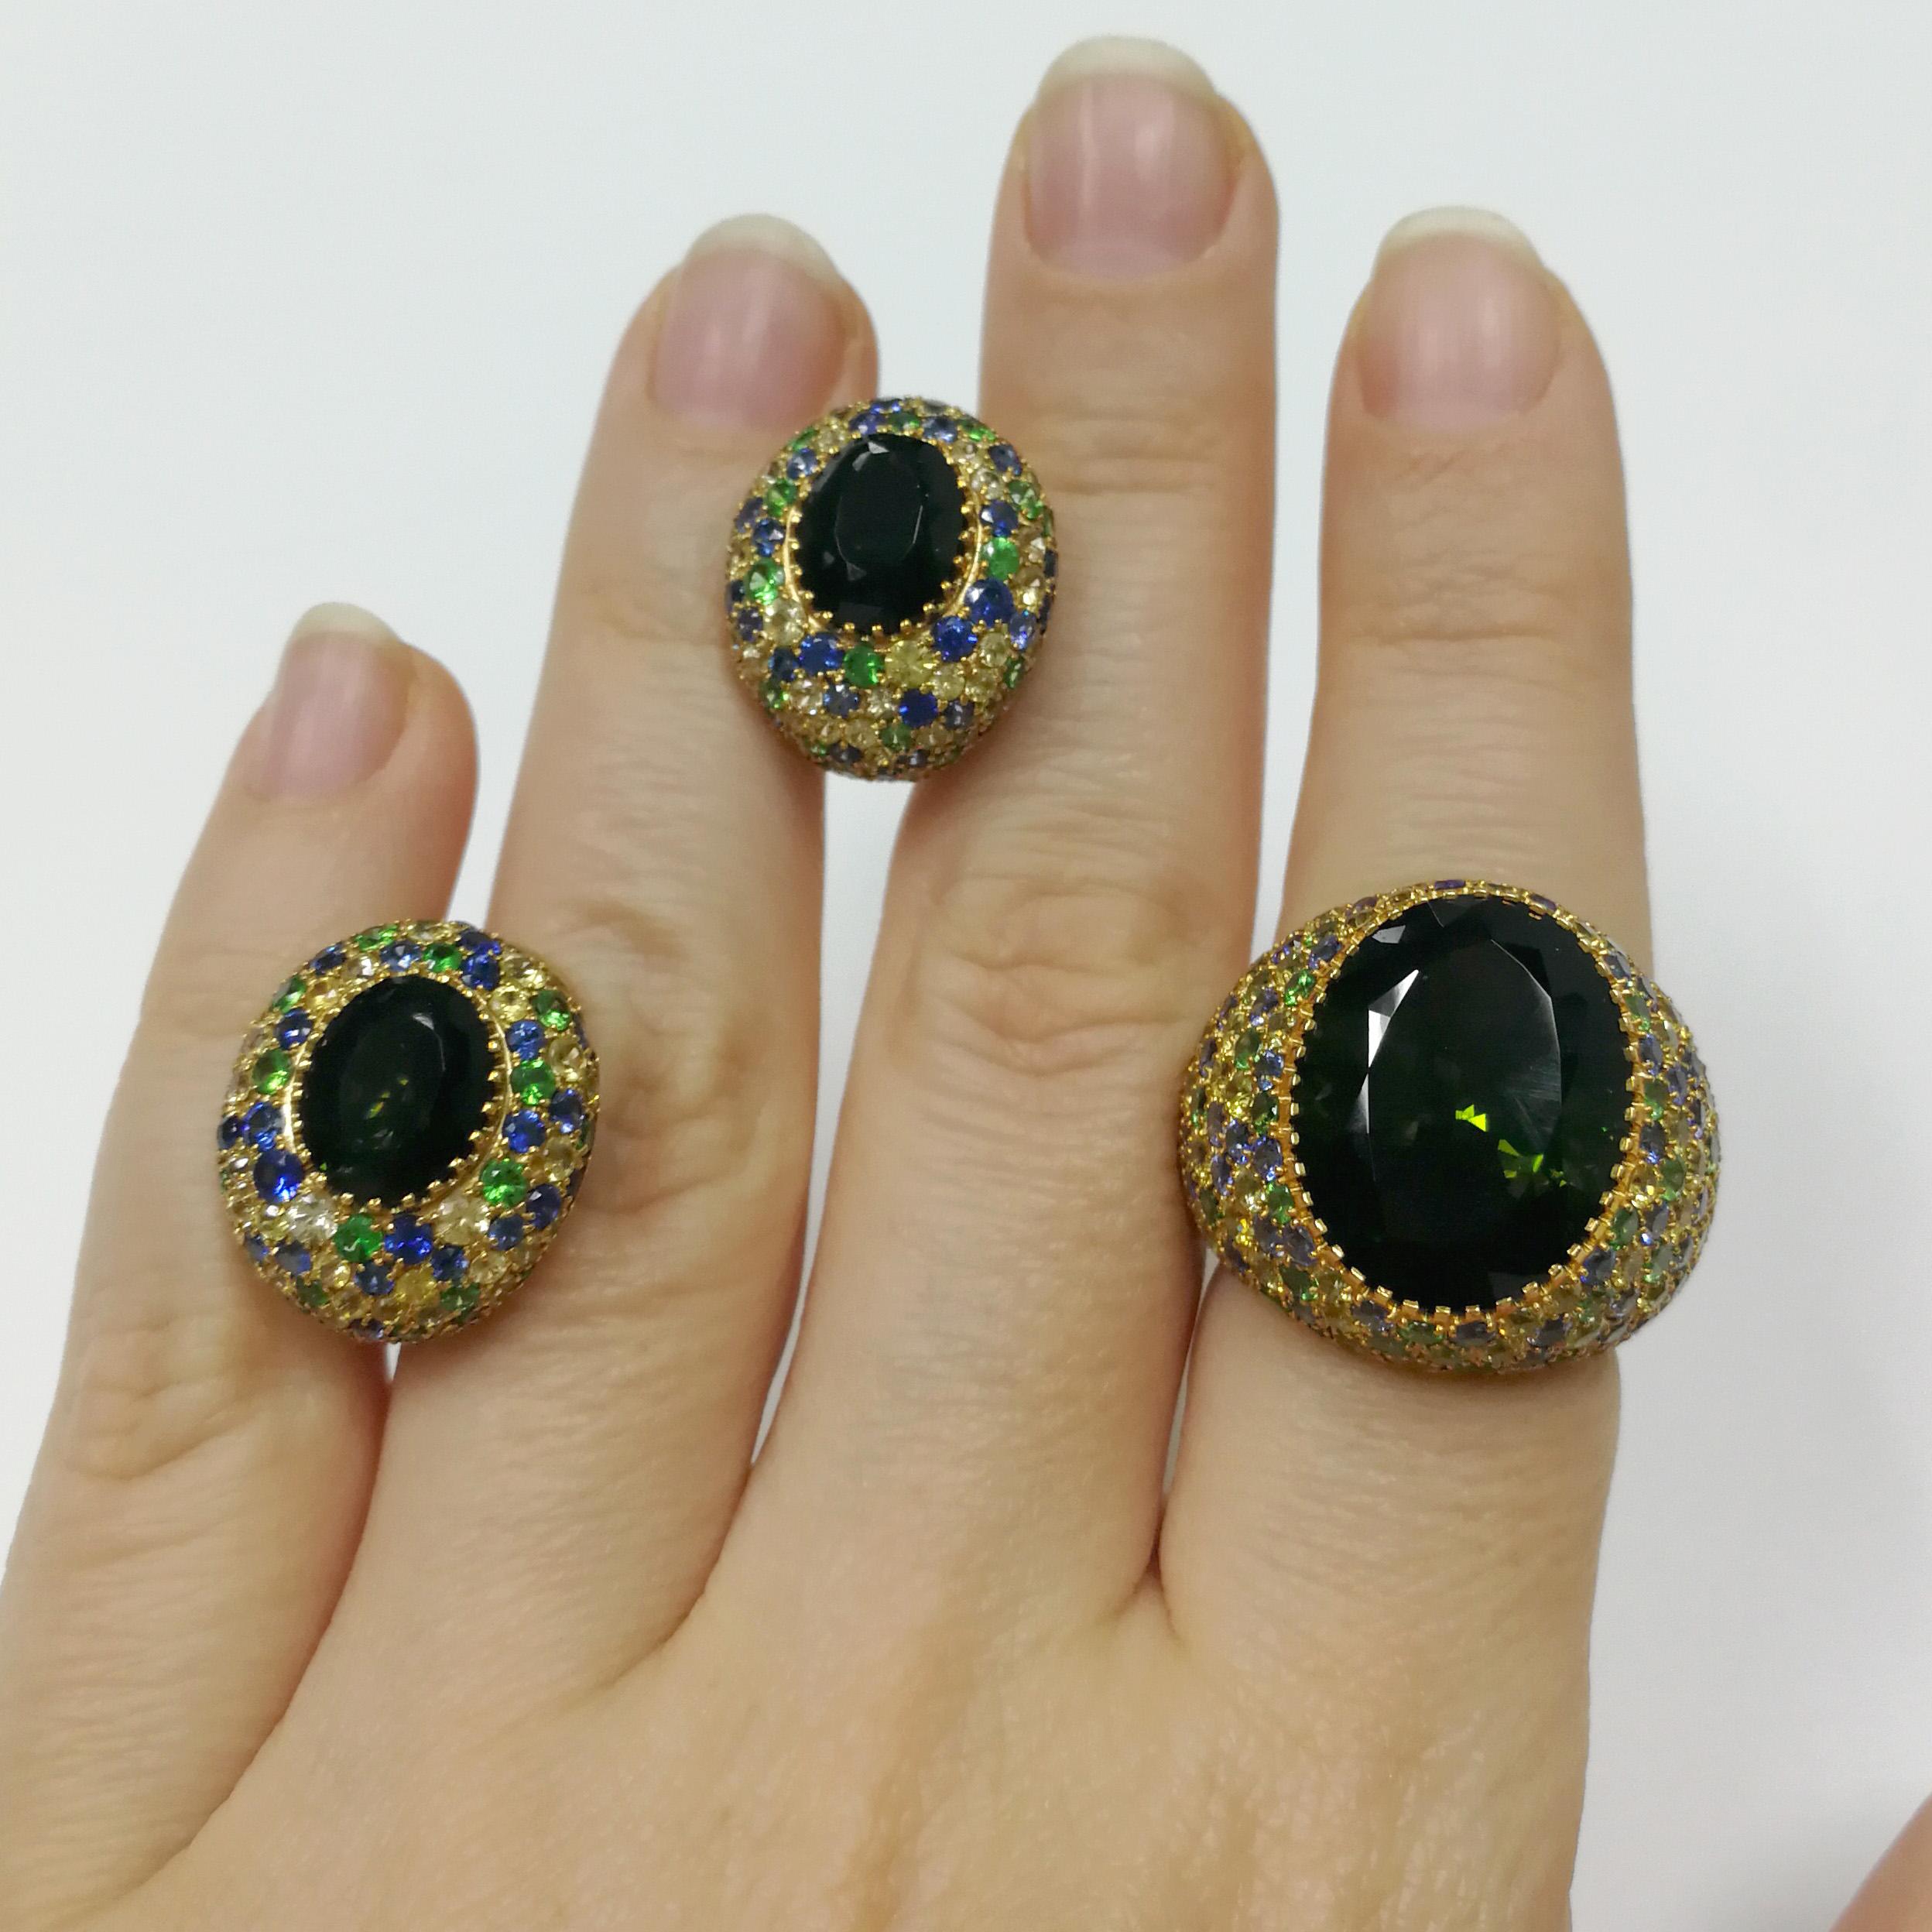 Green Tourmaline Tsavorites Sapphires Yellow 18 Karat Gold Riviera Suite

Please request a video link to check this beauty in action
Ring:
US Size 7 1/4//  EU Size 54 5/8
24.50 x 21.80 mm (WxH)
Weight - 13.55 gm.
Earrings:
16.20 x 18.90 mm